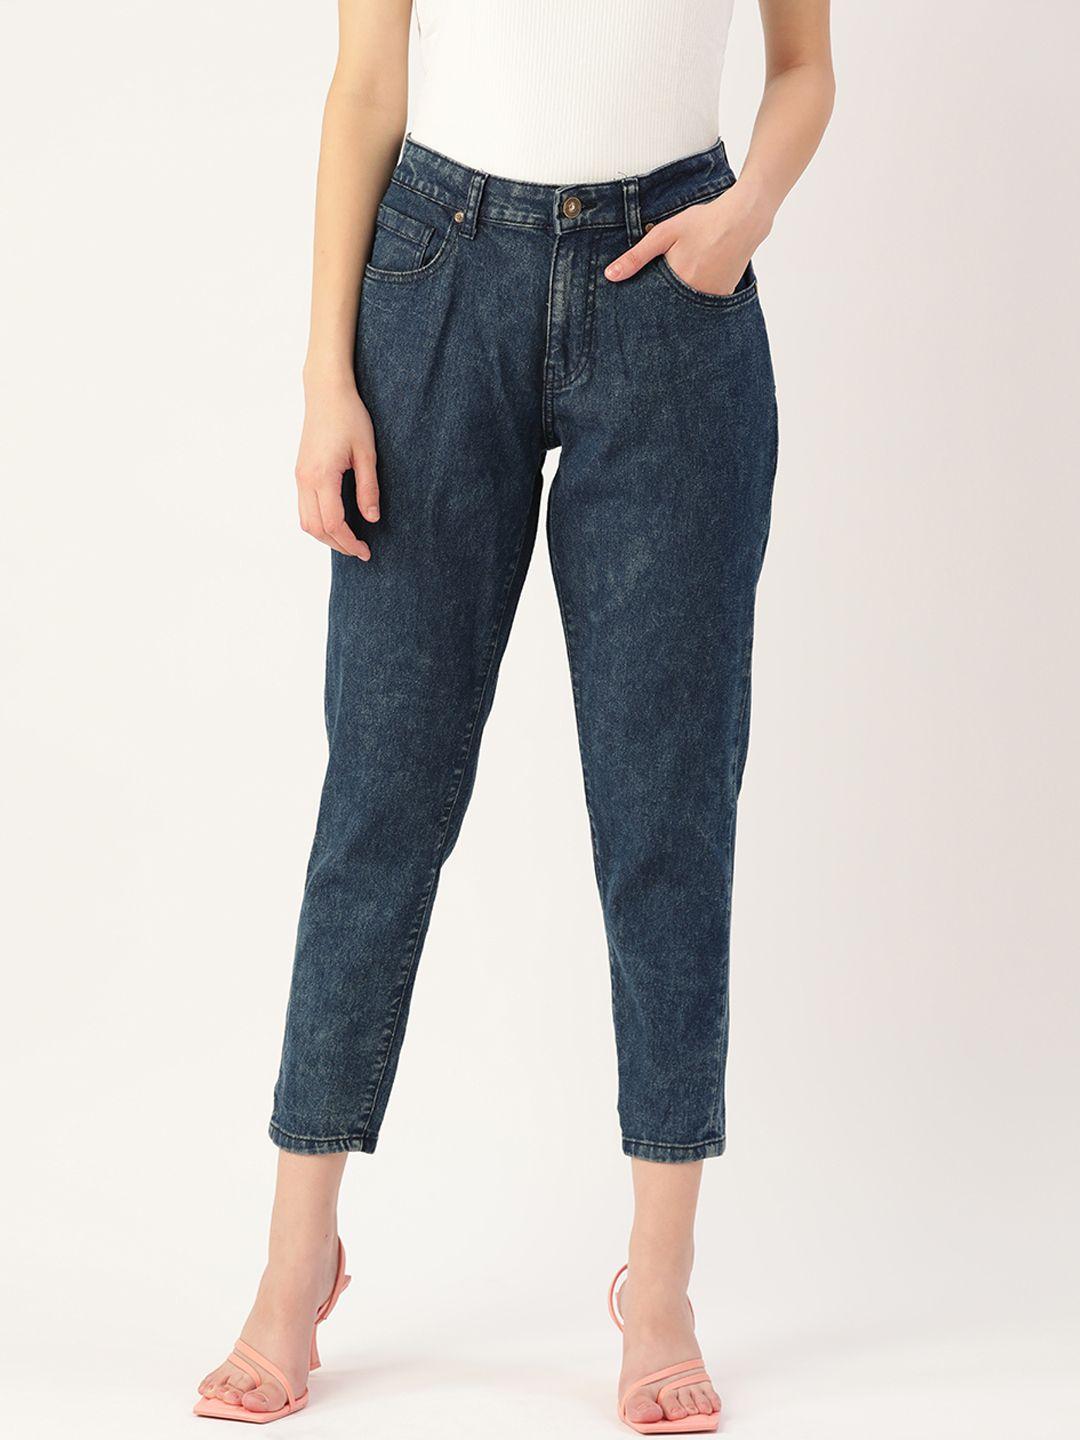 dressberry-women-navy-blue-stretchable-jeans